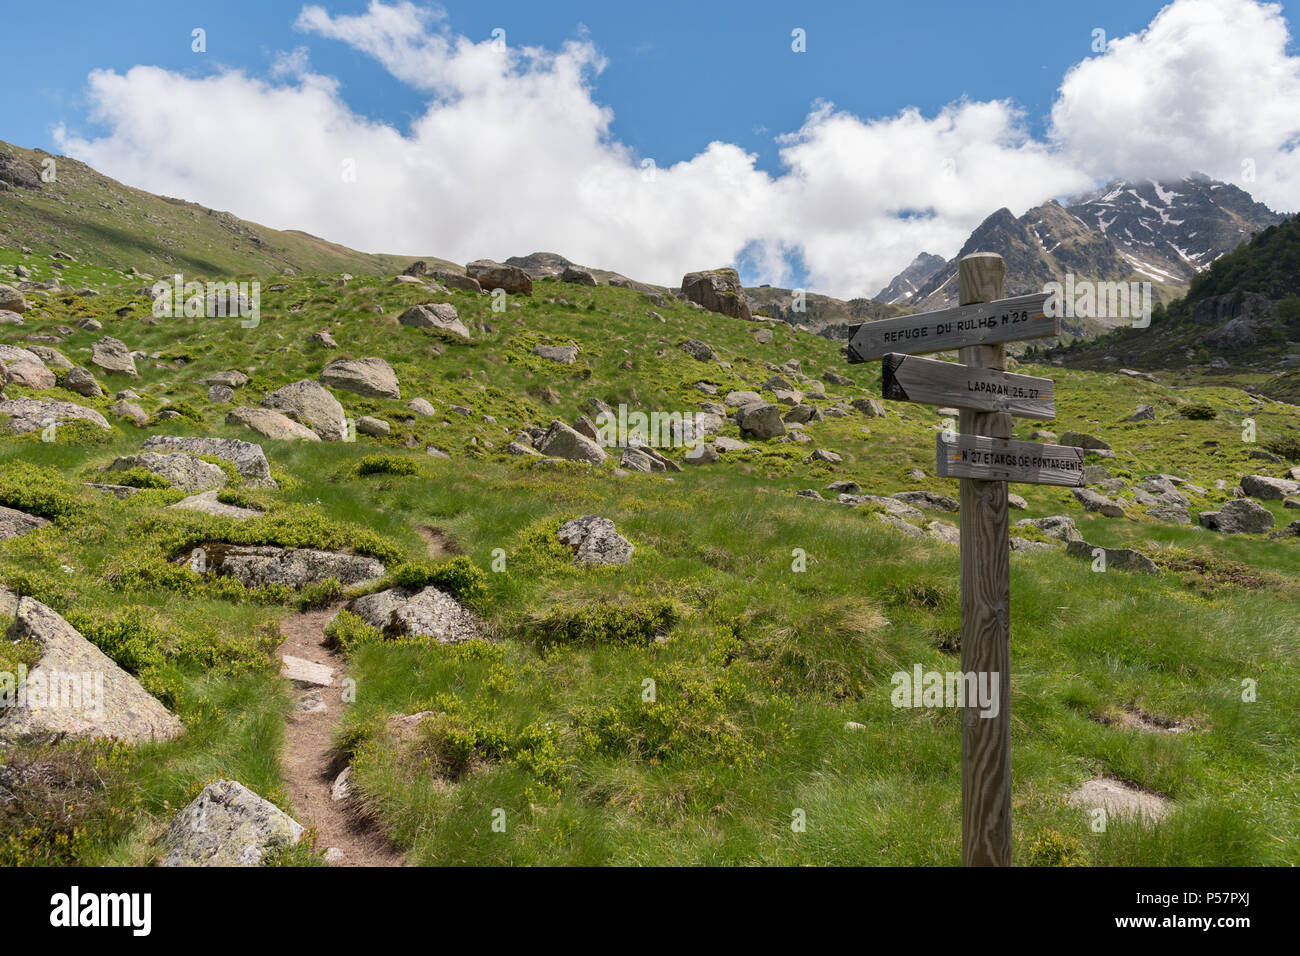 Wooden fingerpost in the French Pyrenees pointing along a footpath to the Refuge du Rulhe, Laparin and the Etangs de Fontargente, on the GR10 route. Stock Photo